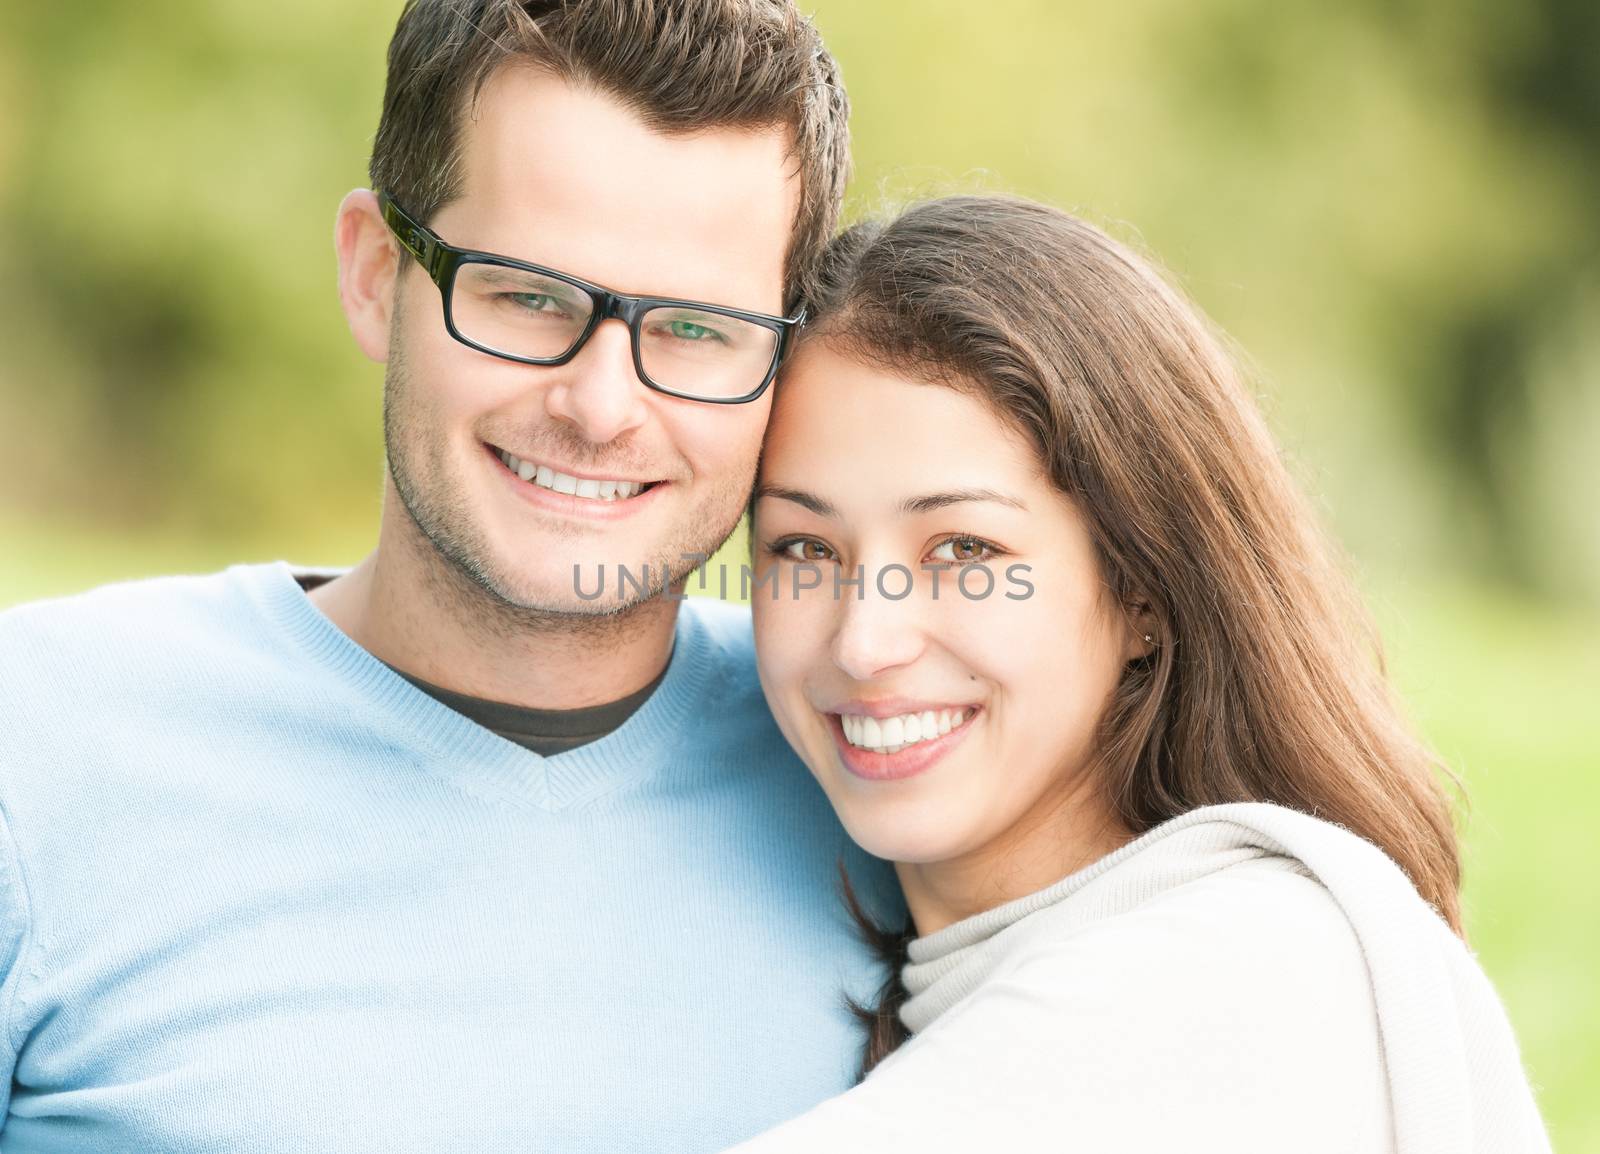 Portrait of beautiful romantic couple. People dating in park. Pretty woman with man in glasses and blue pullover. Green nature as background. Young positive family having leisure time outside.